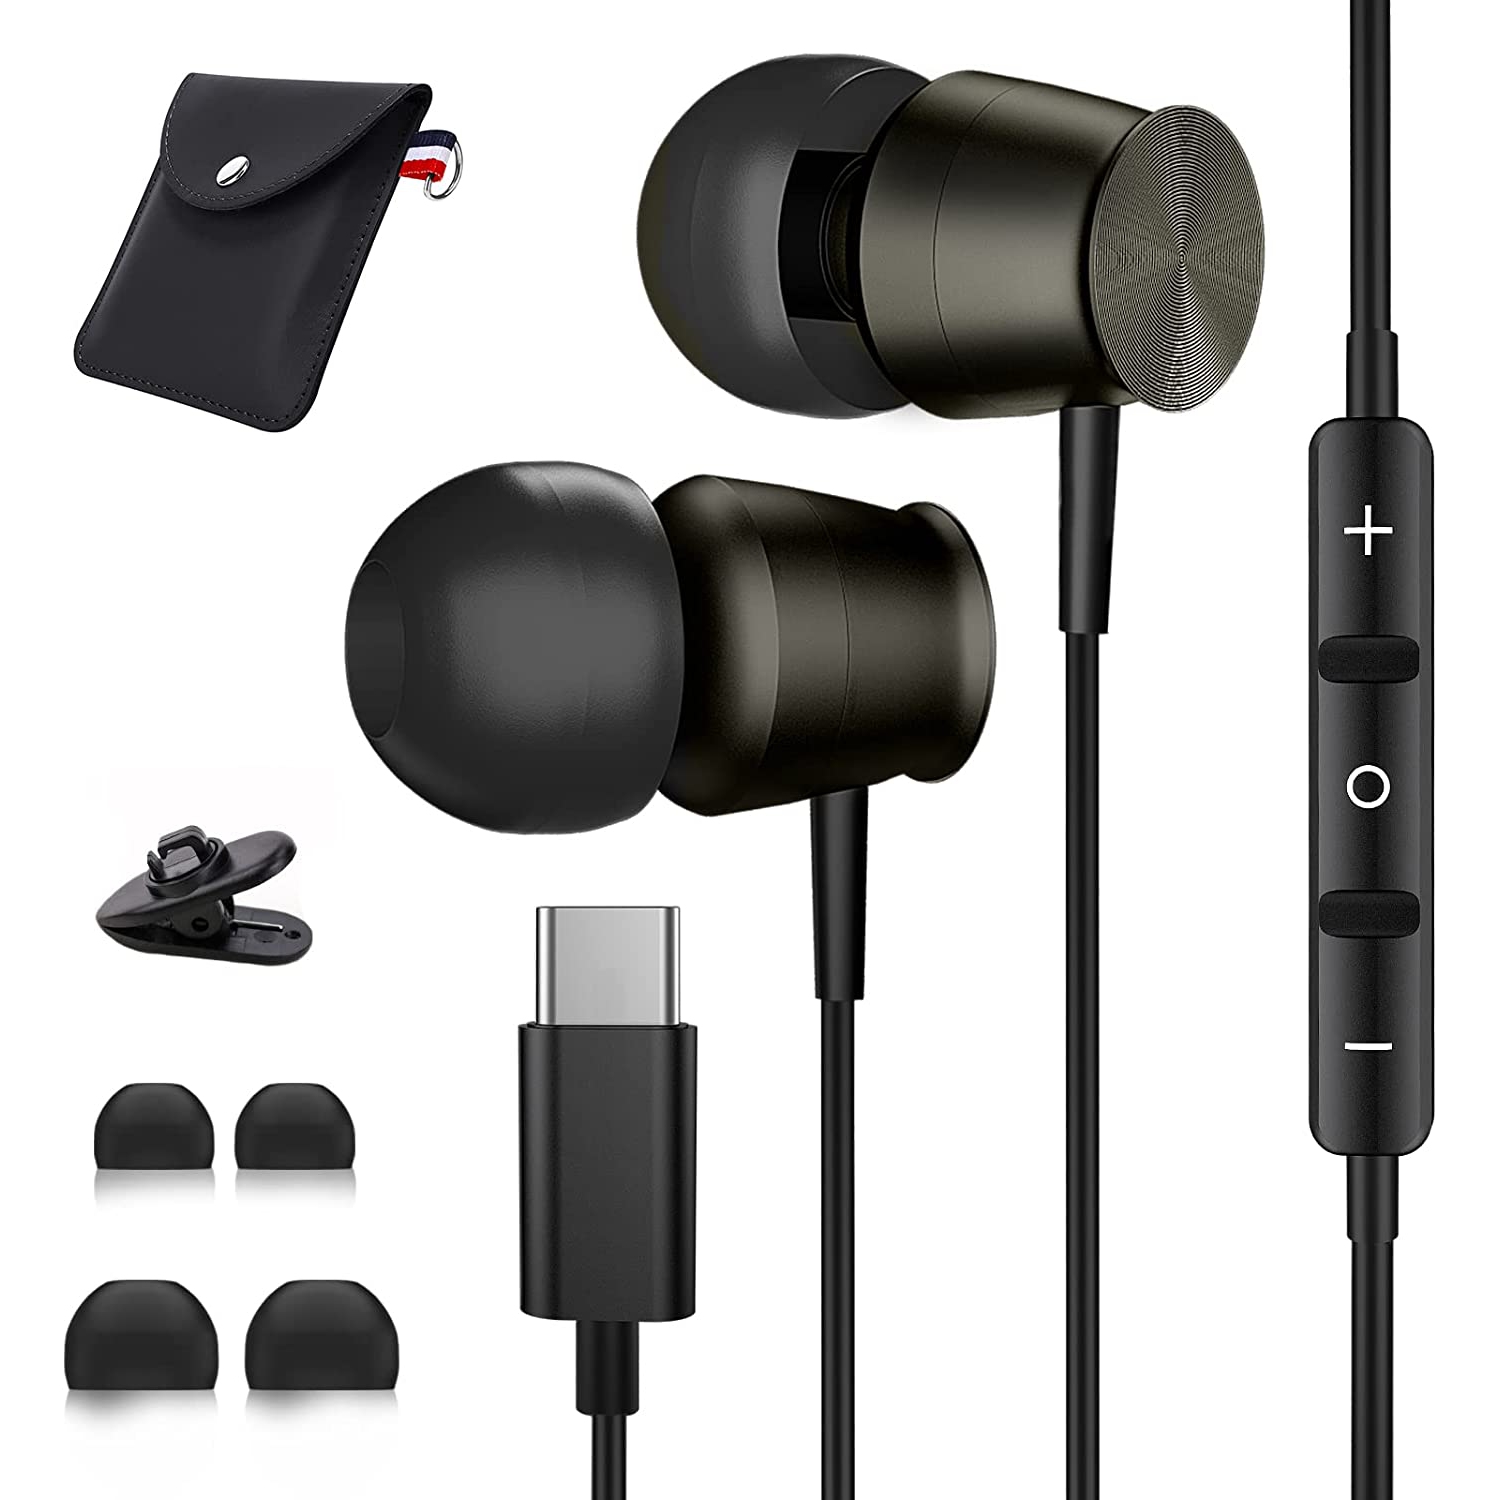 Dolaer USB C Headphones for Samsung S22 Ultra S21 FE Pixel 6 Pro, USB Type C Earphones with Microphone DAC Noise Cancelling in-Ear USB C Earbuds for Samsung Galaxy S20 FE S21 Ultra